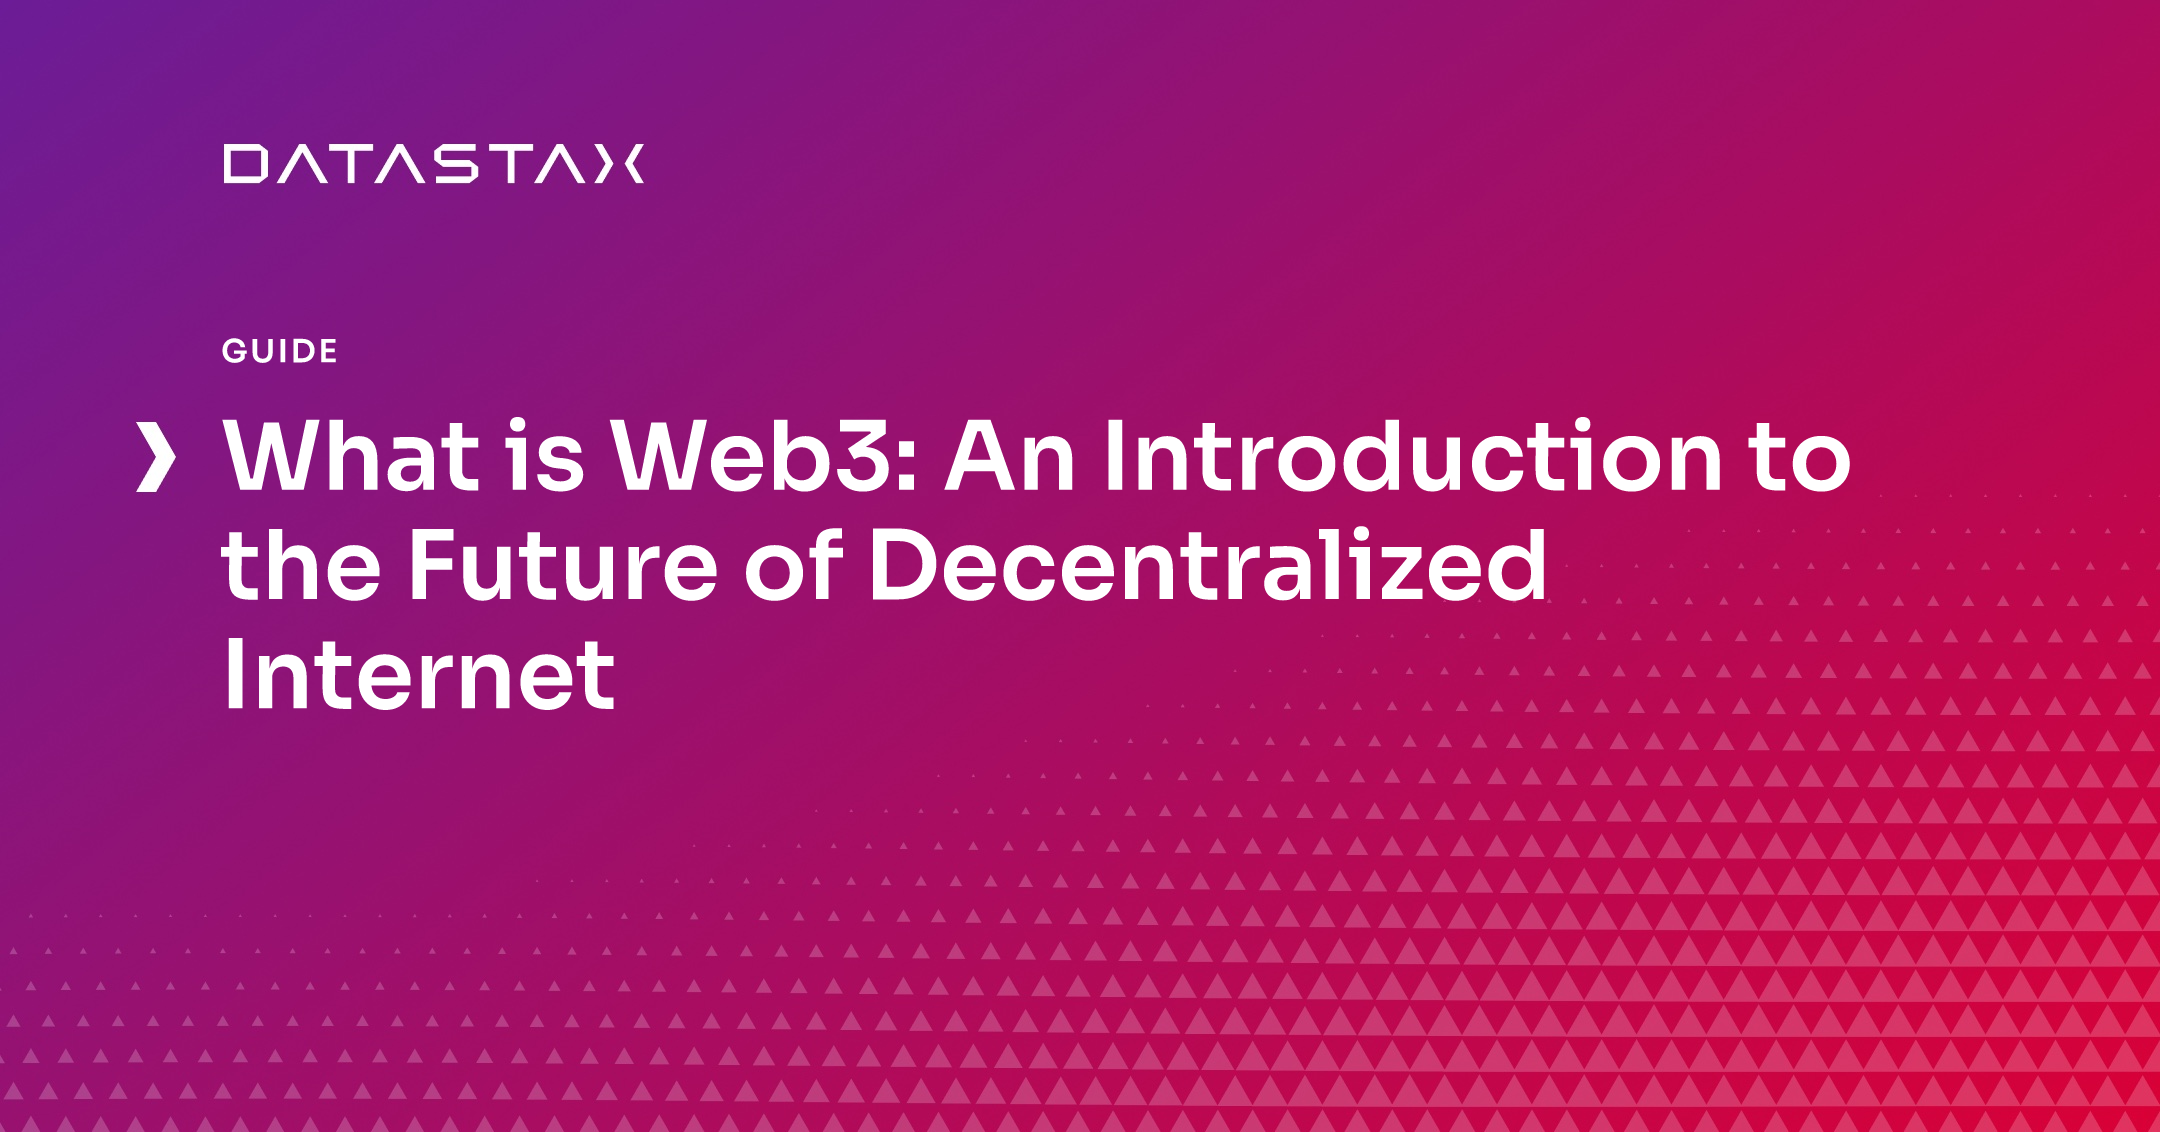 What is Web3: An Introduction to the Future of Decentralized Internet